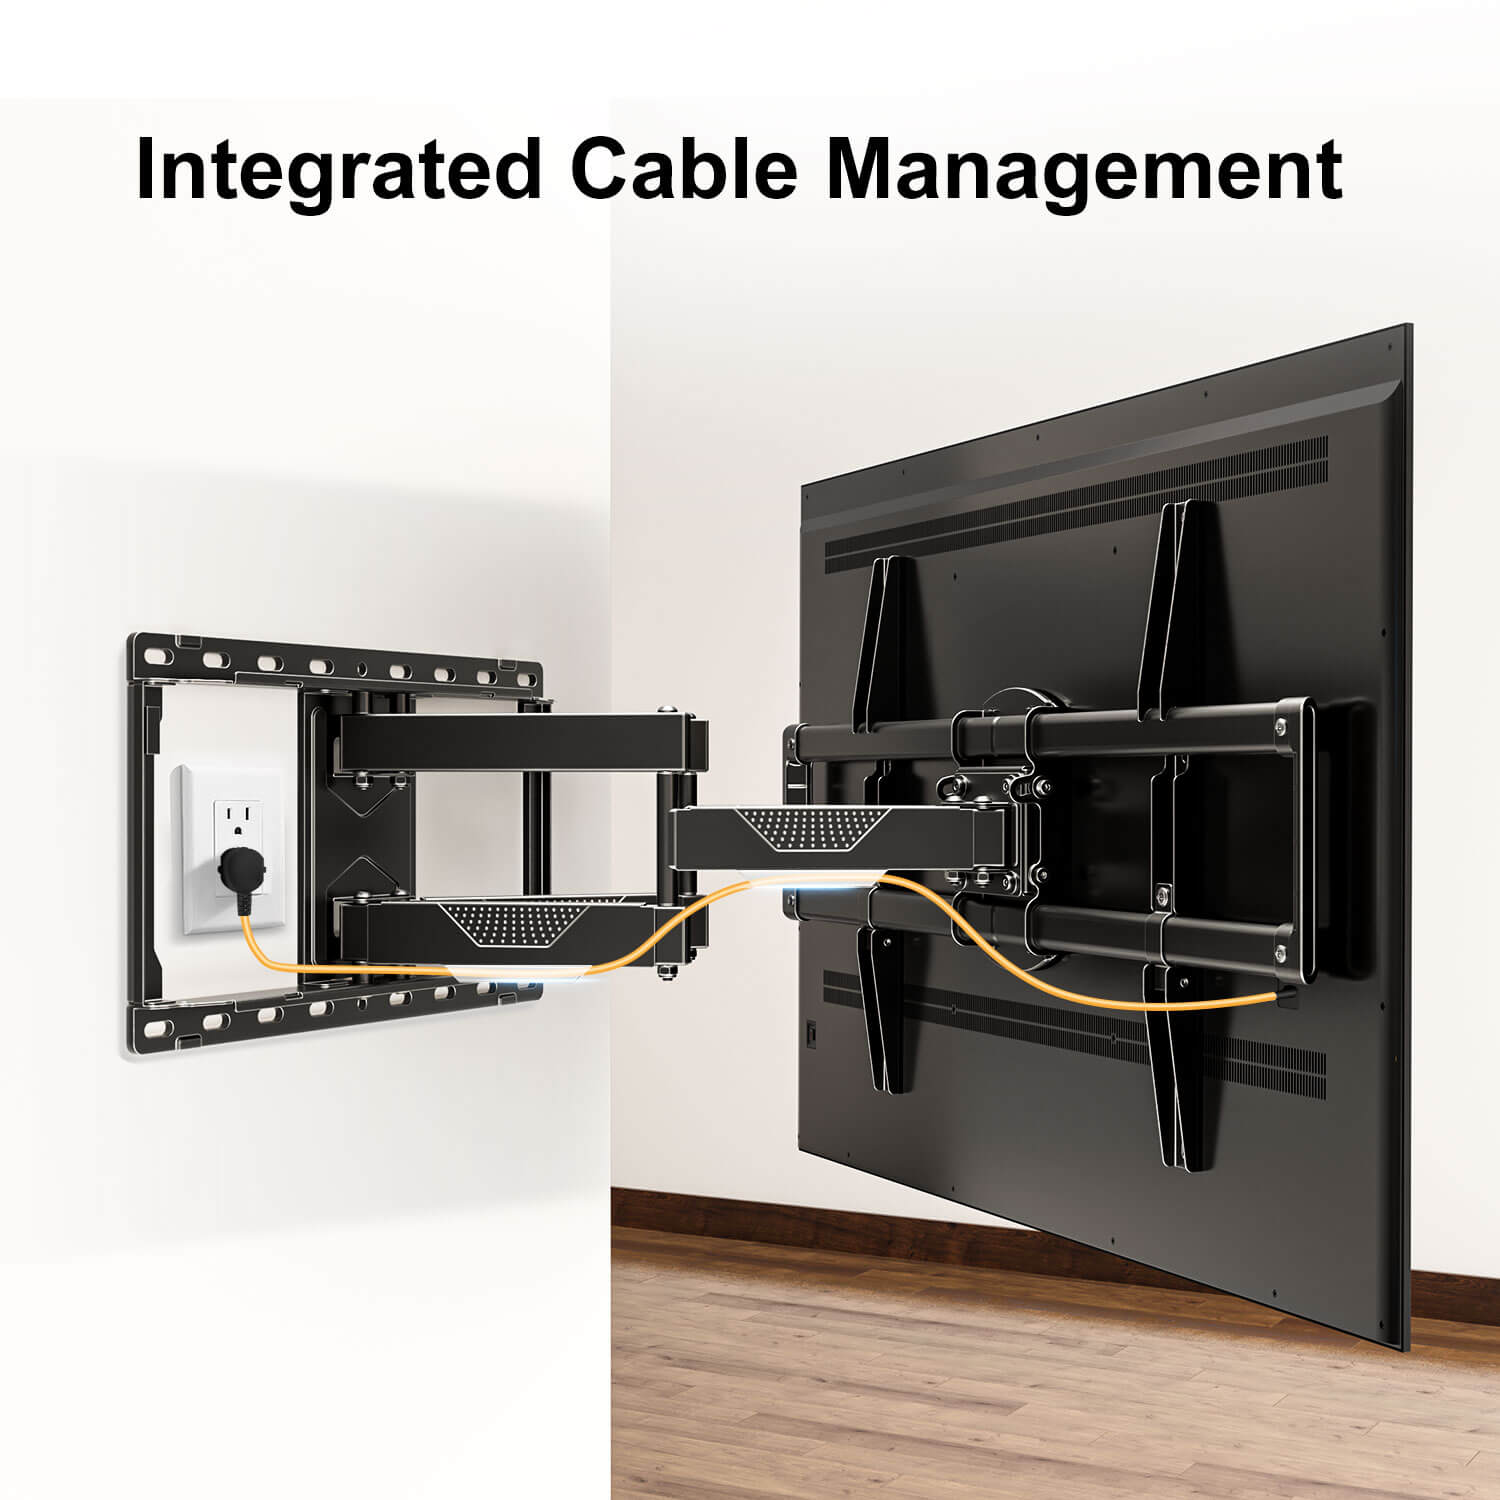 75 inch TV mount with integrated cable management